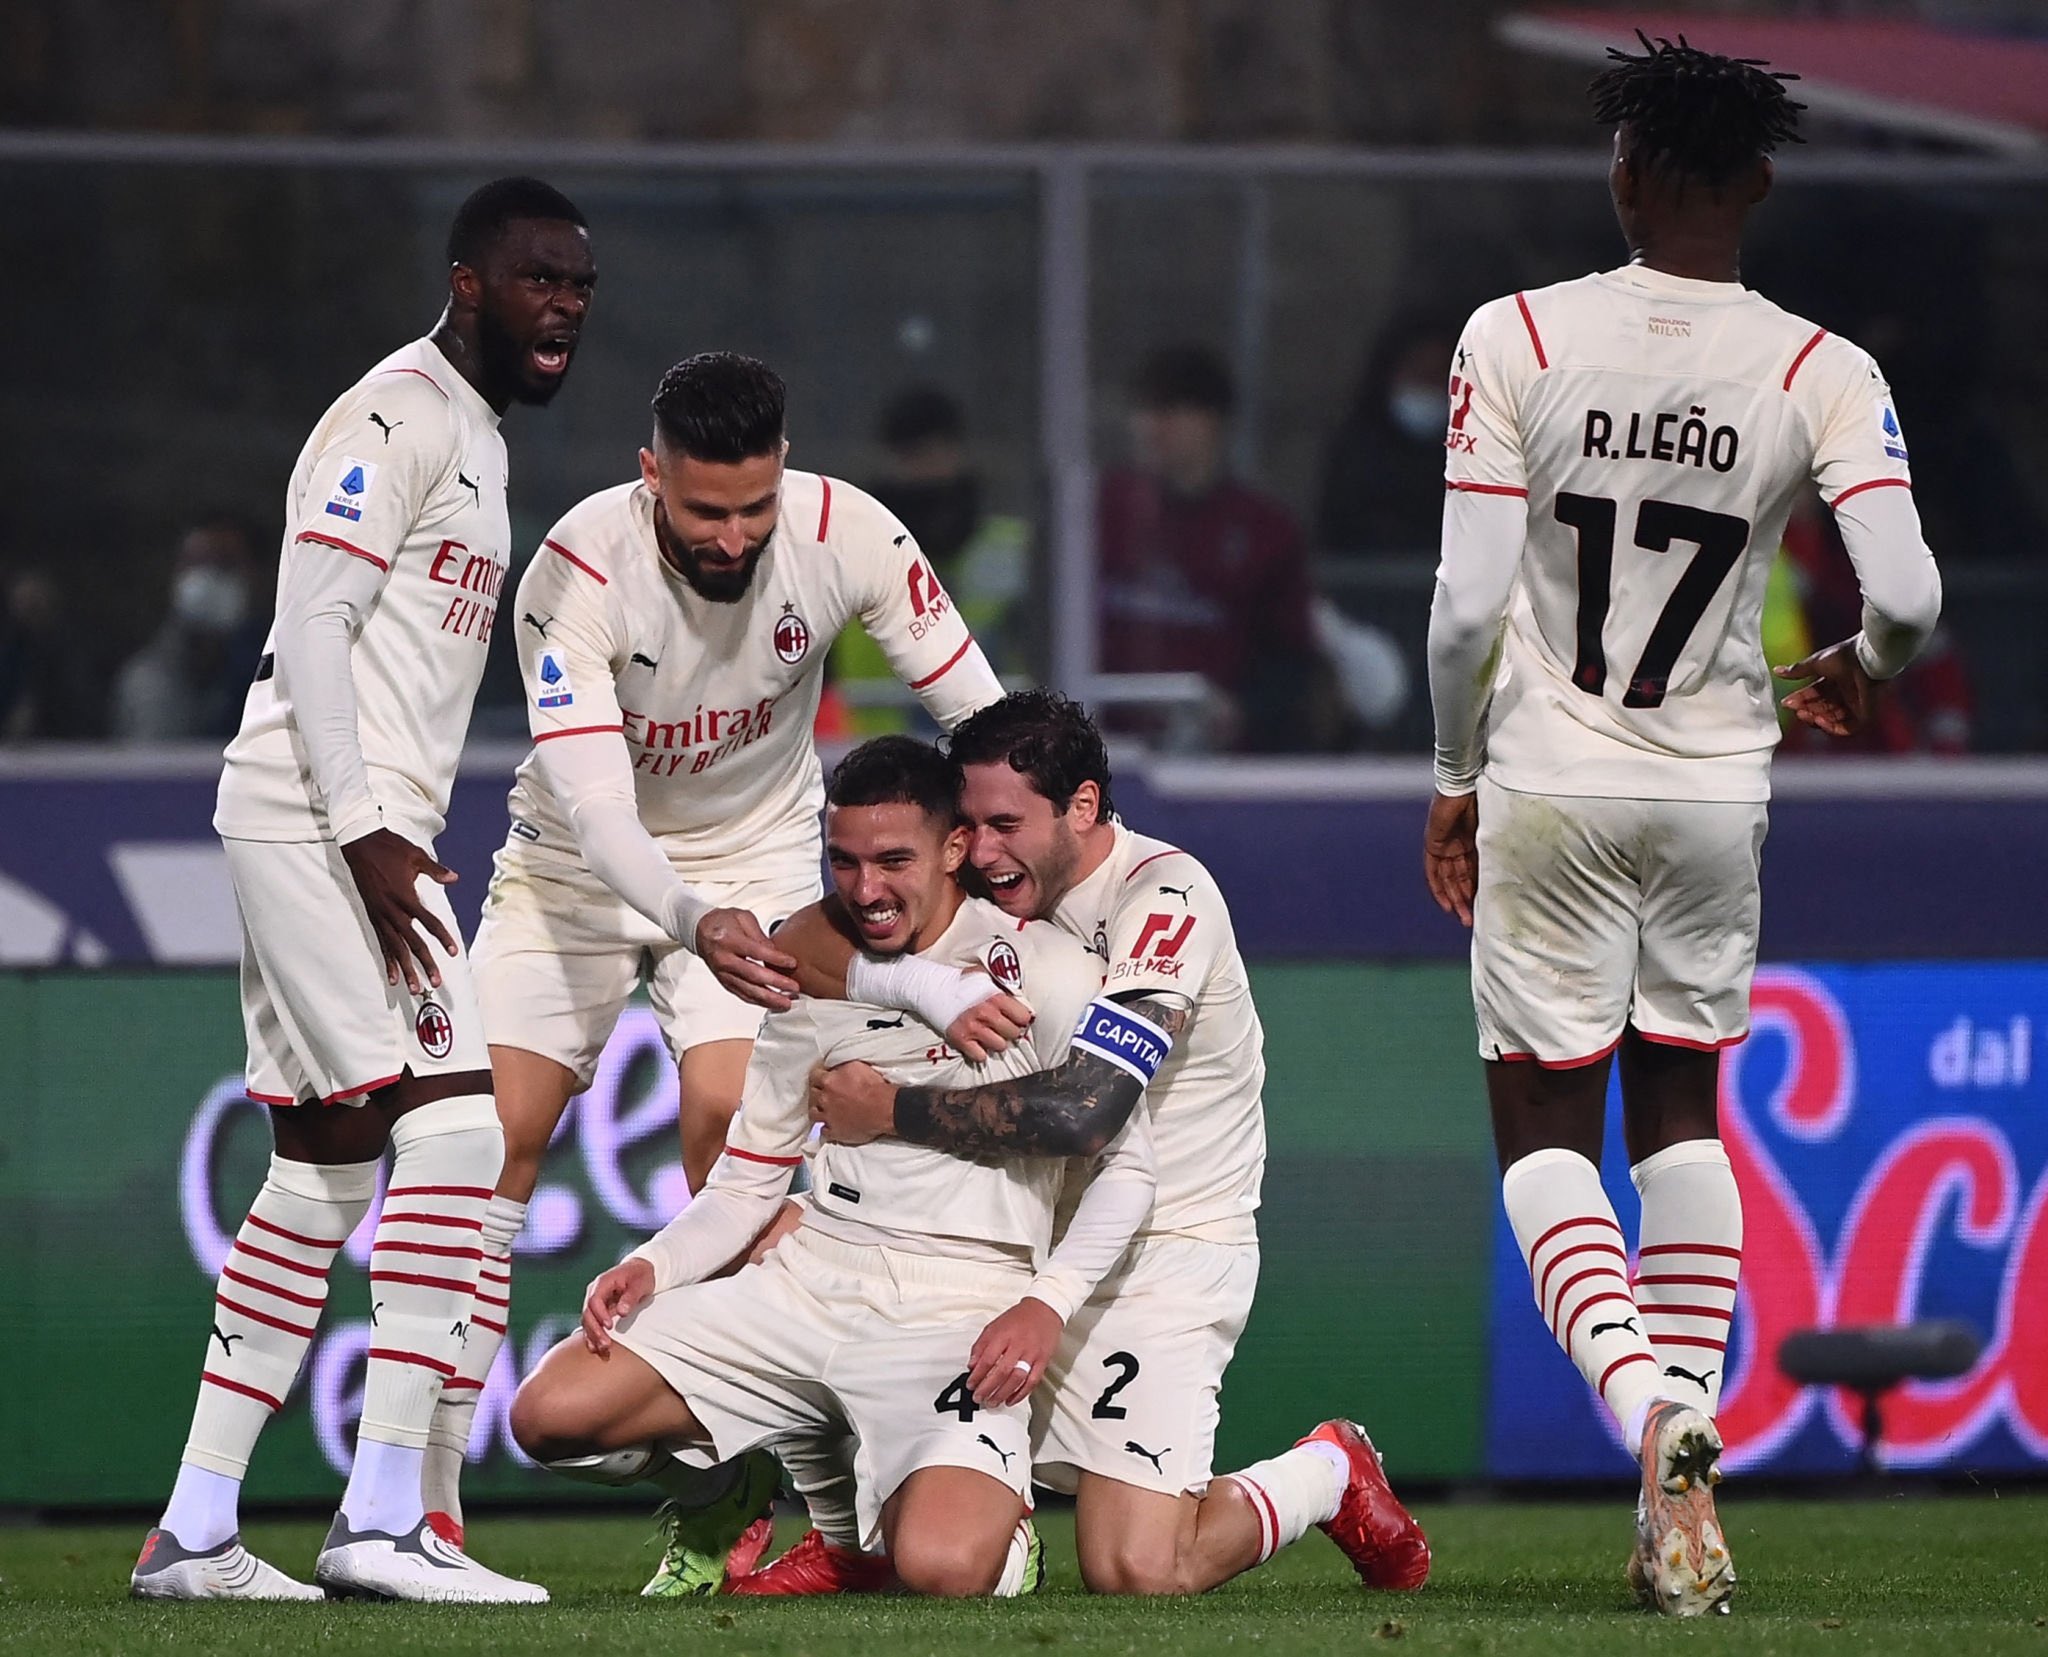 Thanks to the defeat of Inter, Bennacer and Milan can be champions

